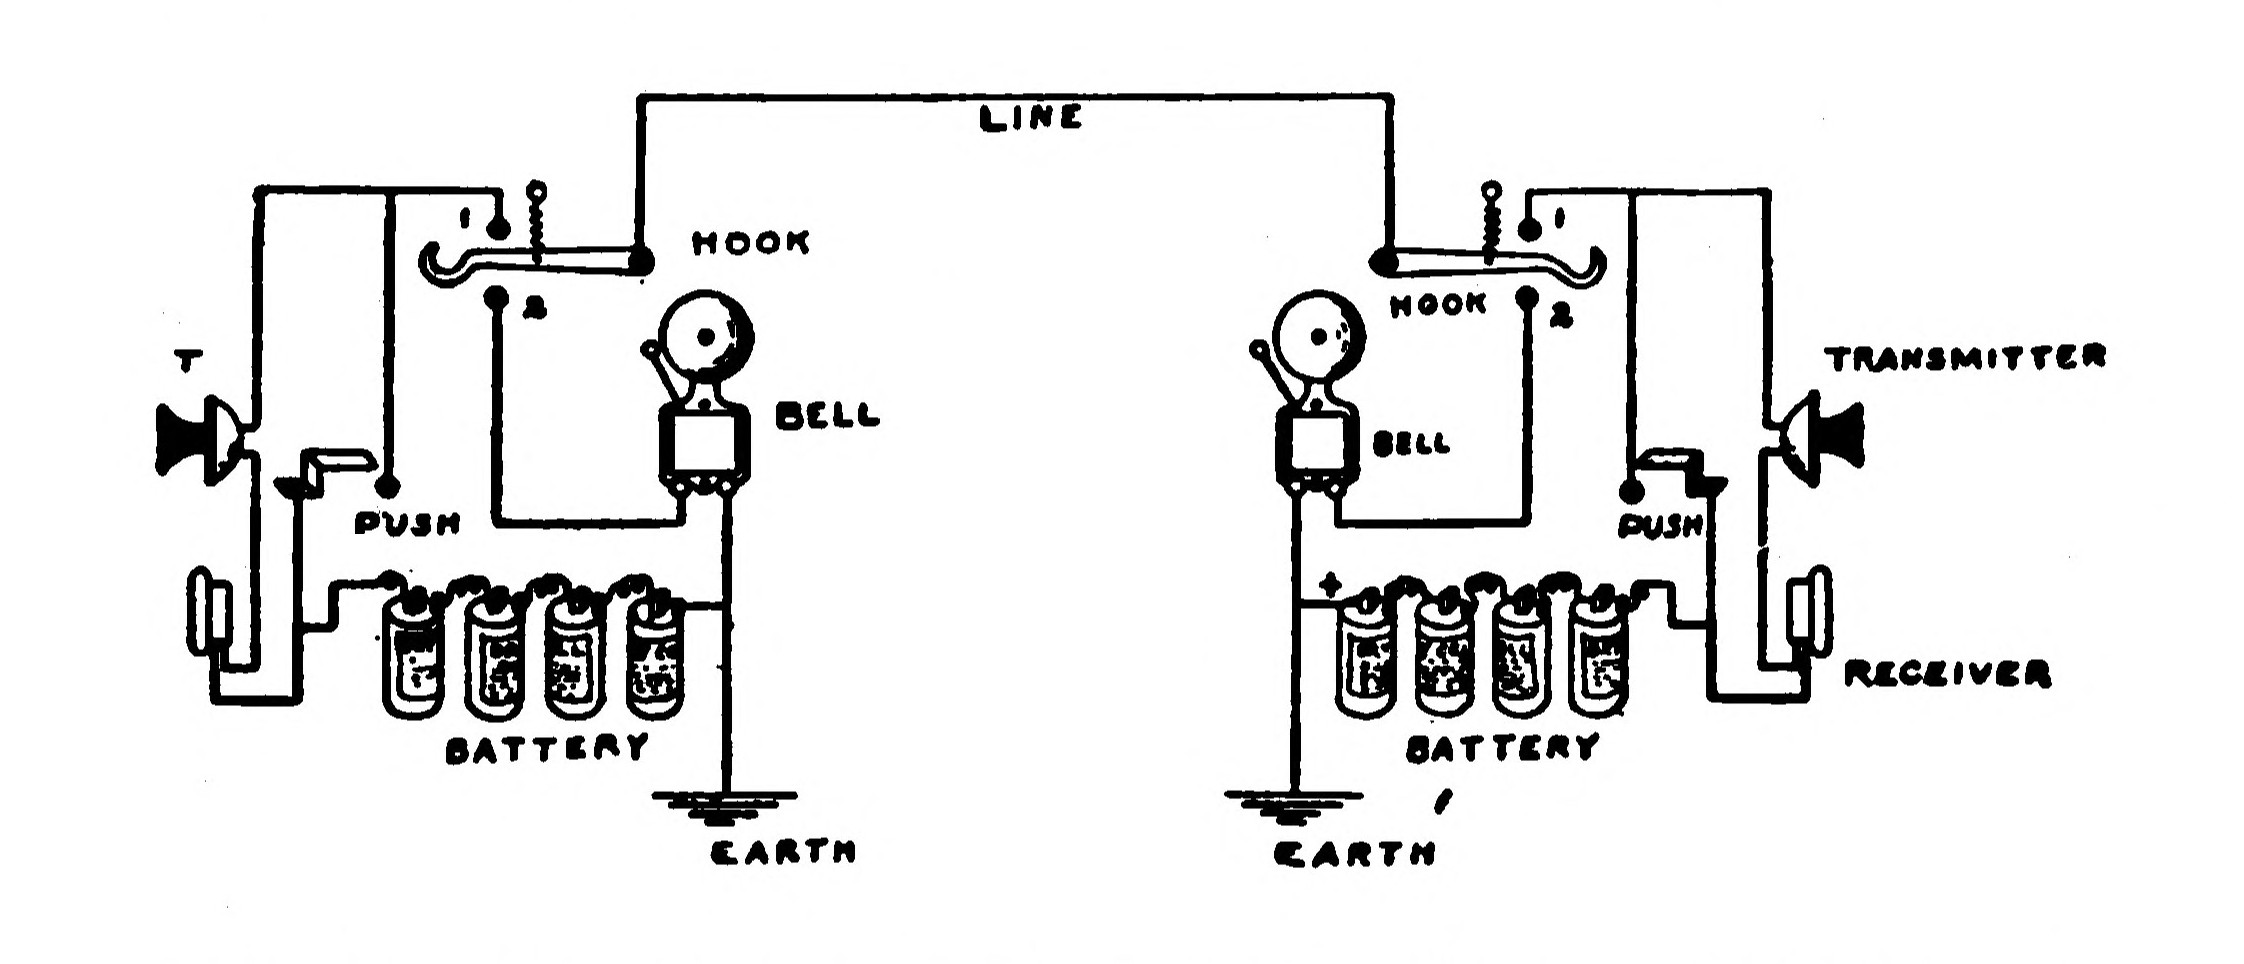 FIG. 97.—Circuit showing how to connect two Telephone Stations to the Line.